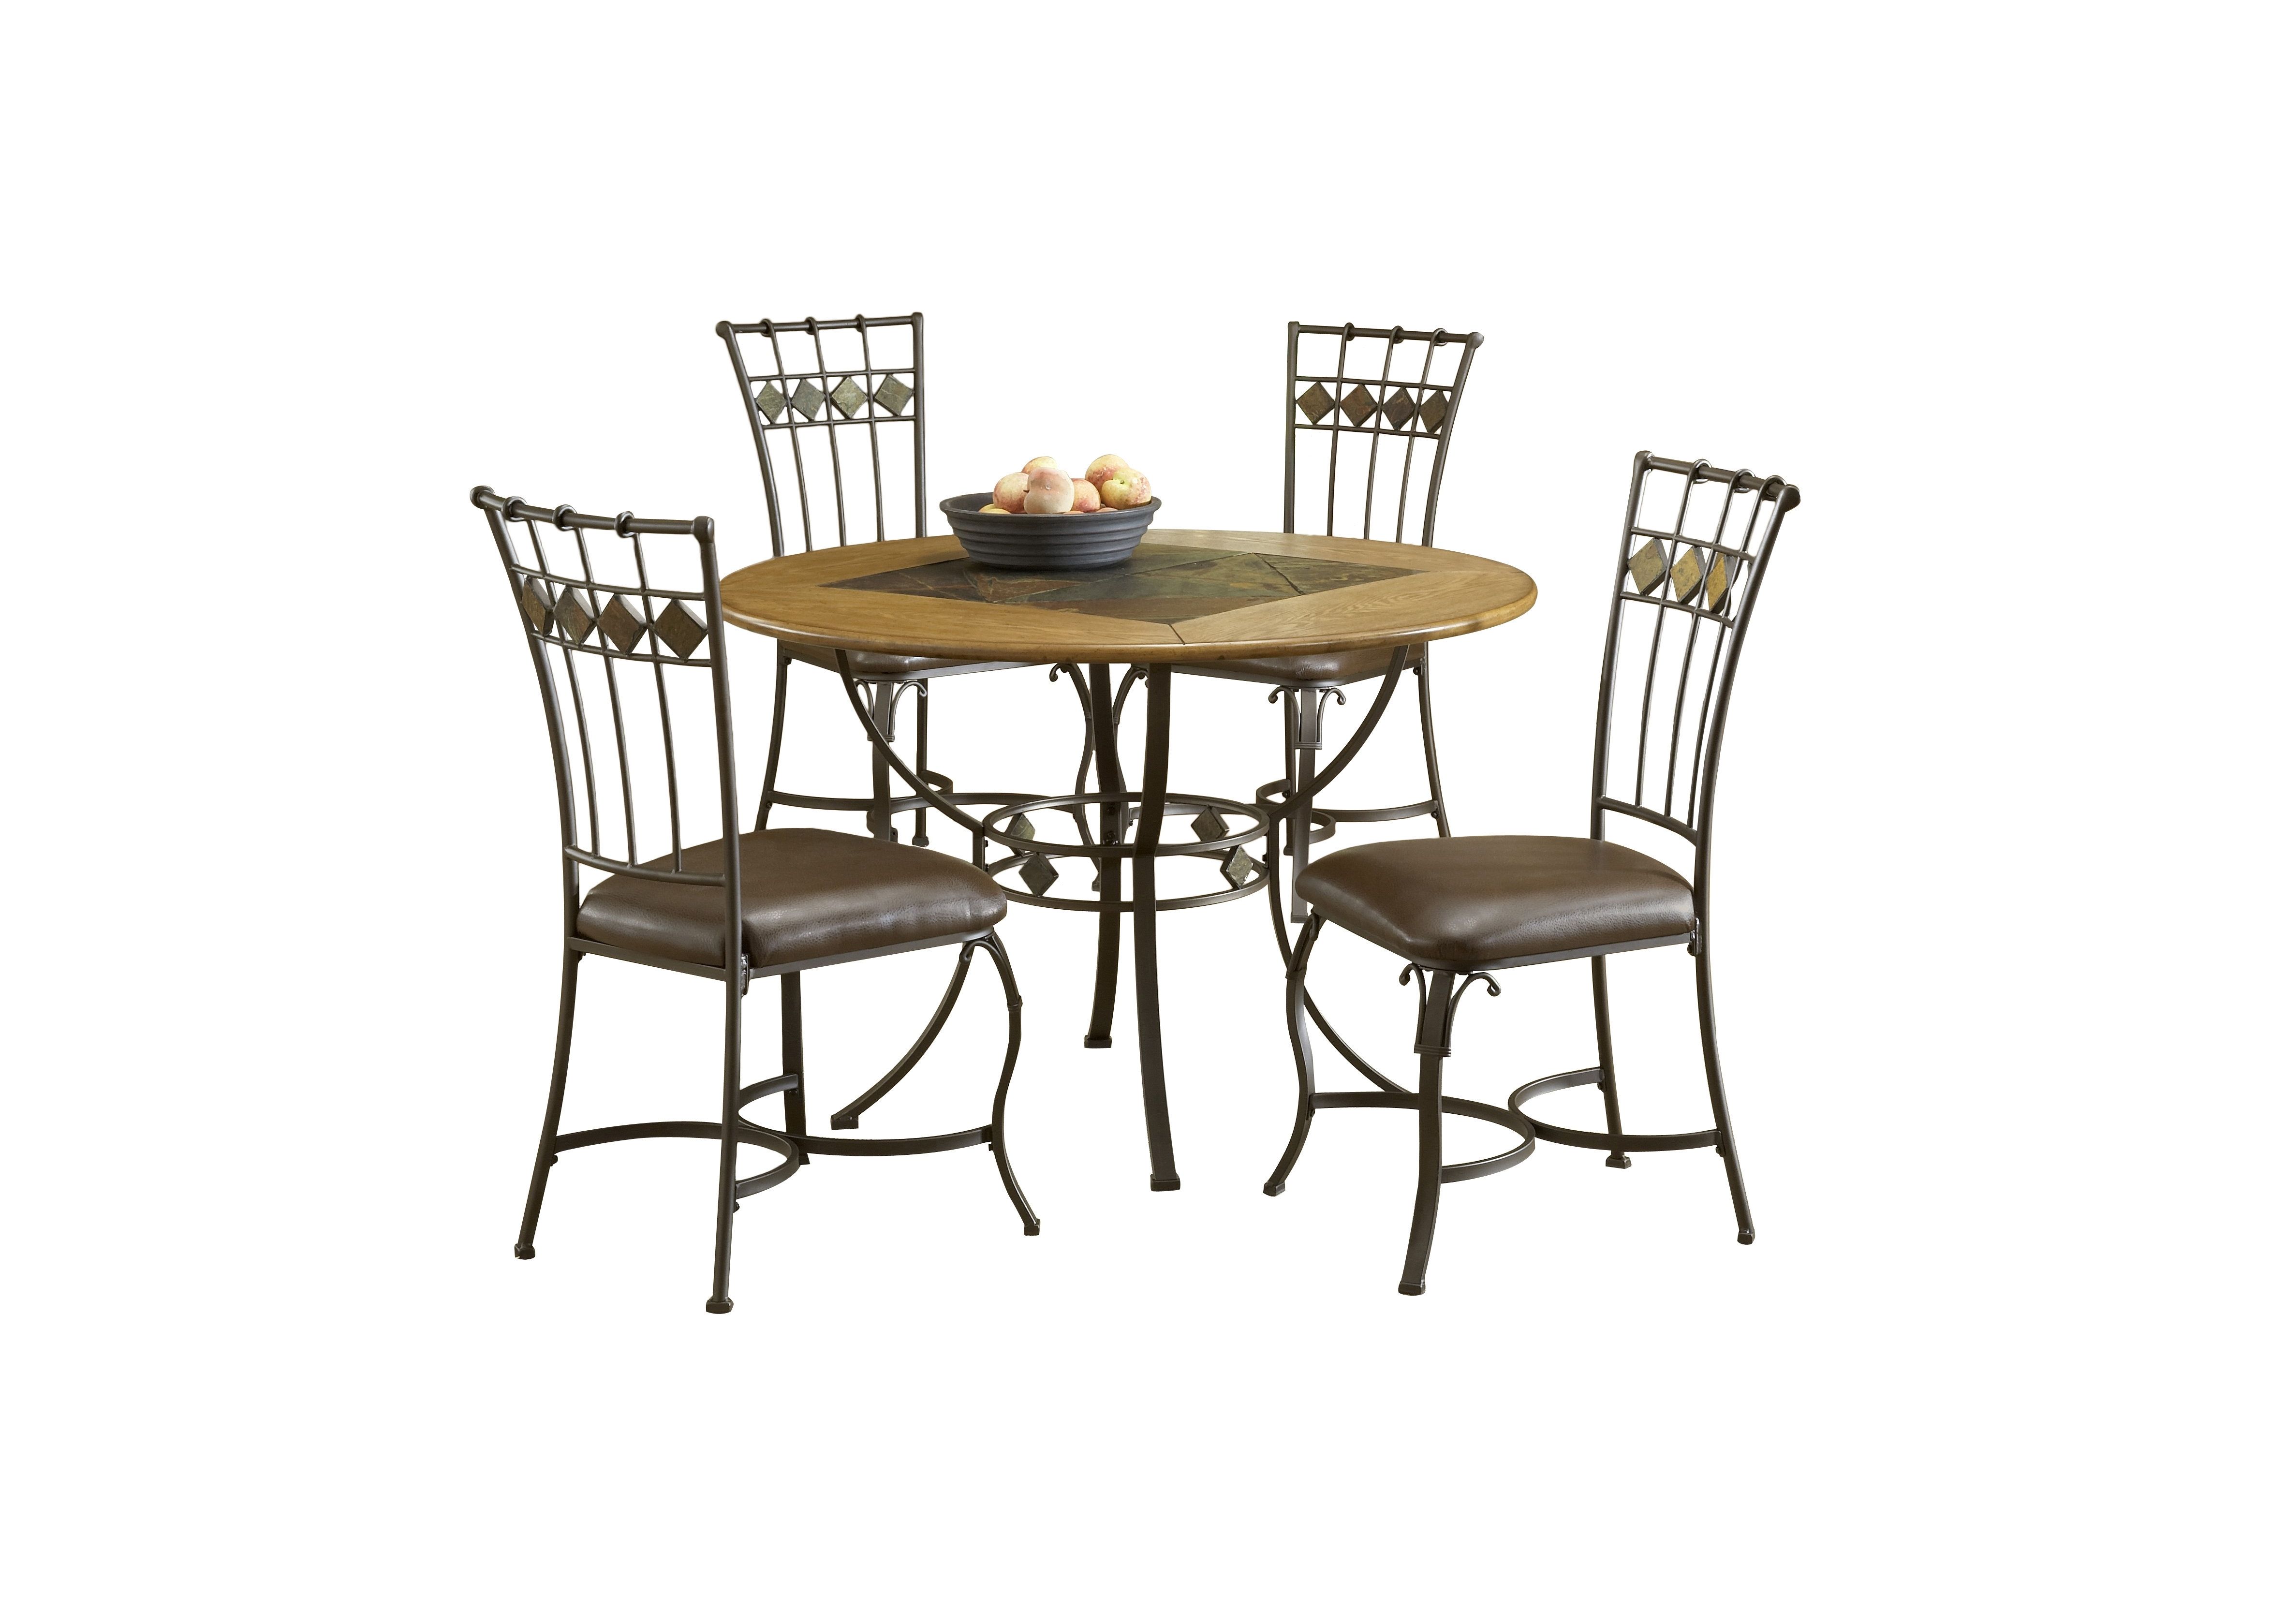 Red Barrel Studio Boyers 5 Piece Dining Set & Reviews | Wayfair Inside Most Popular Candice Ii 5 Piece Round Dining Sets With Slat Back Side Chairs (View 5 of 20)